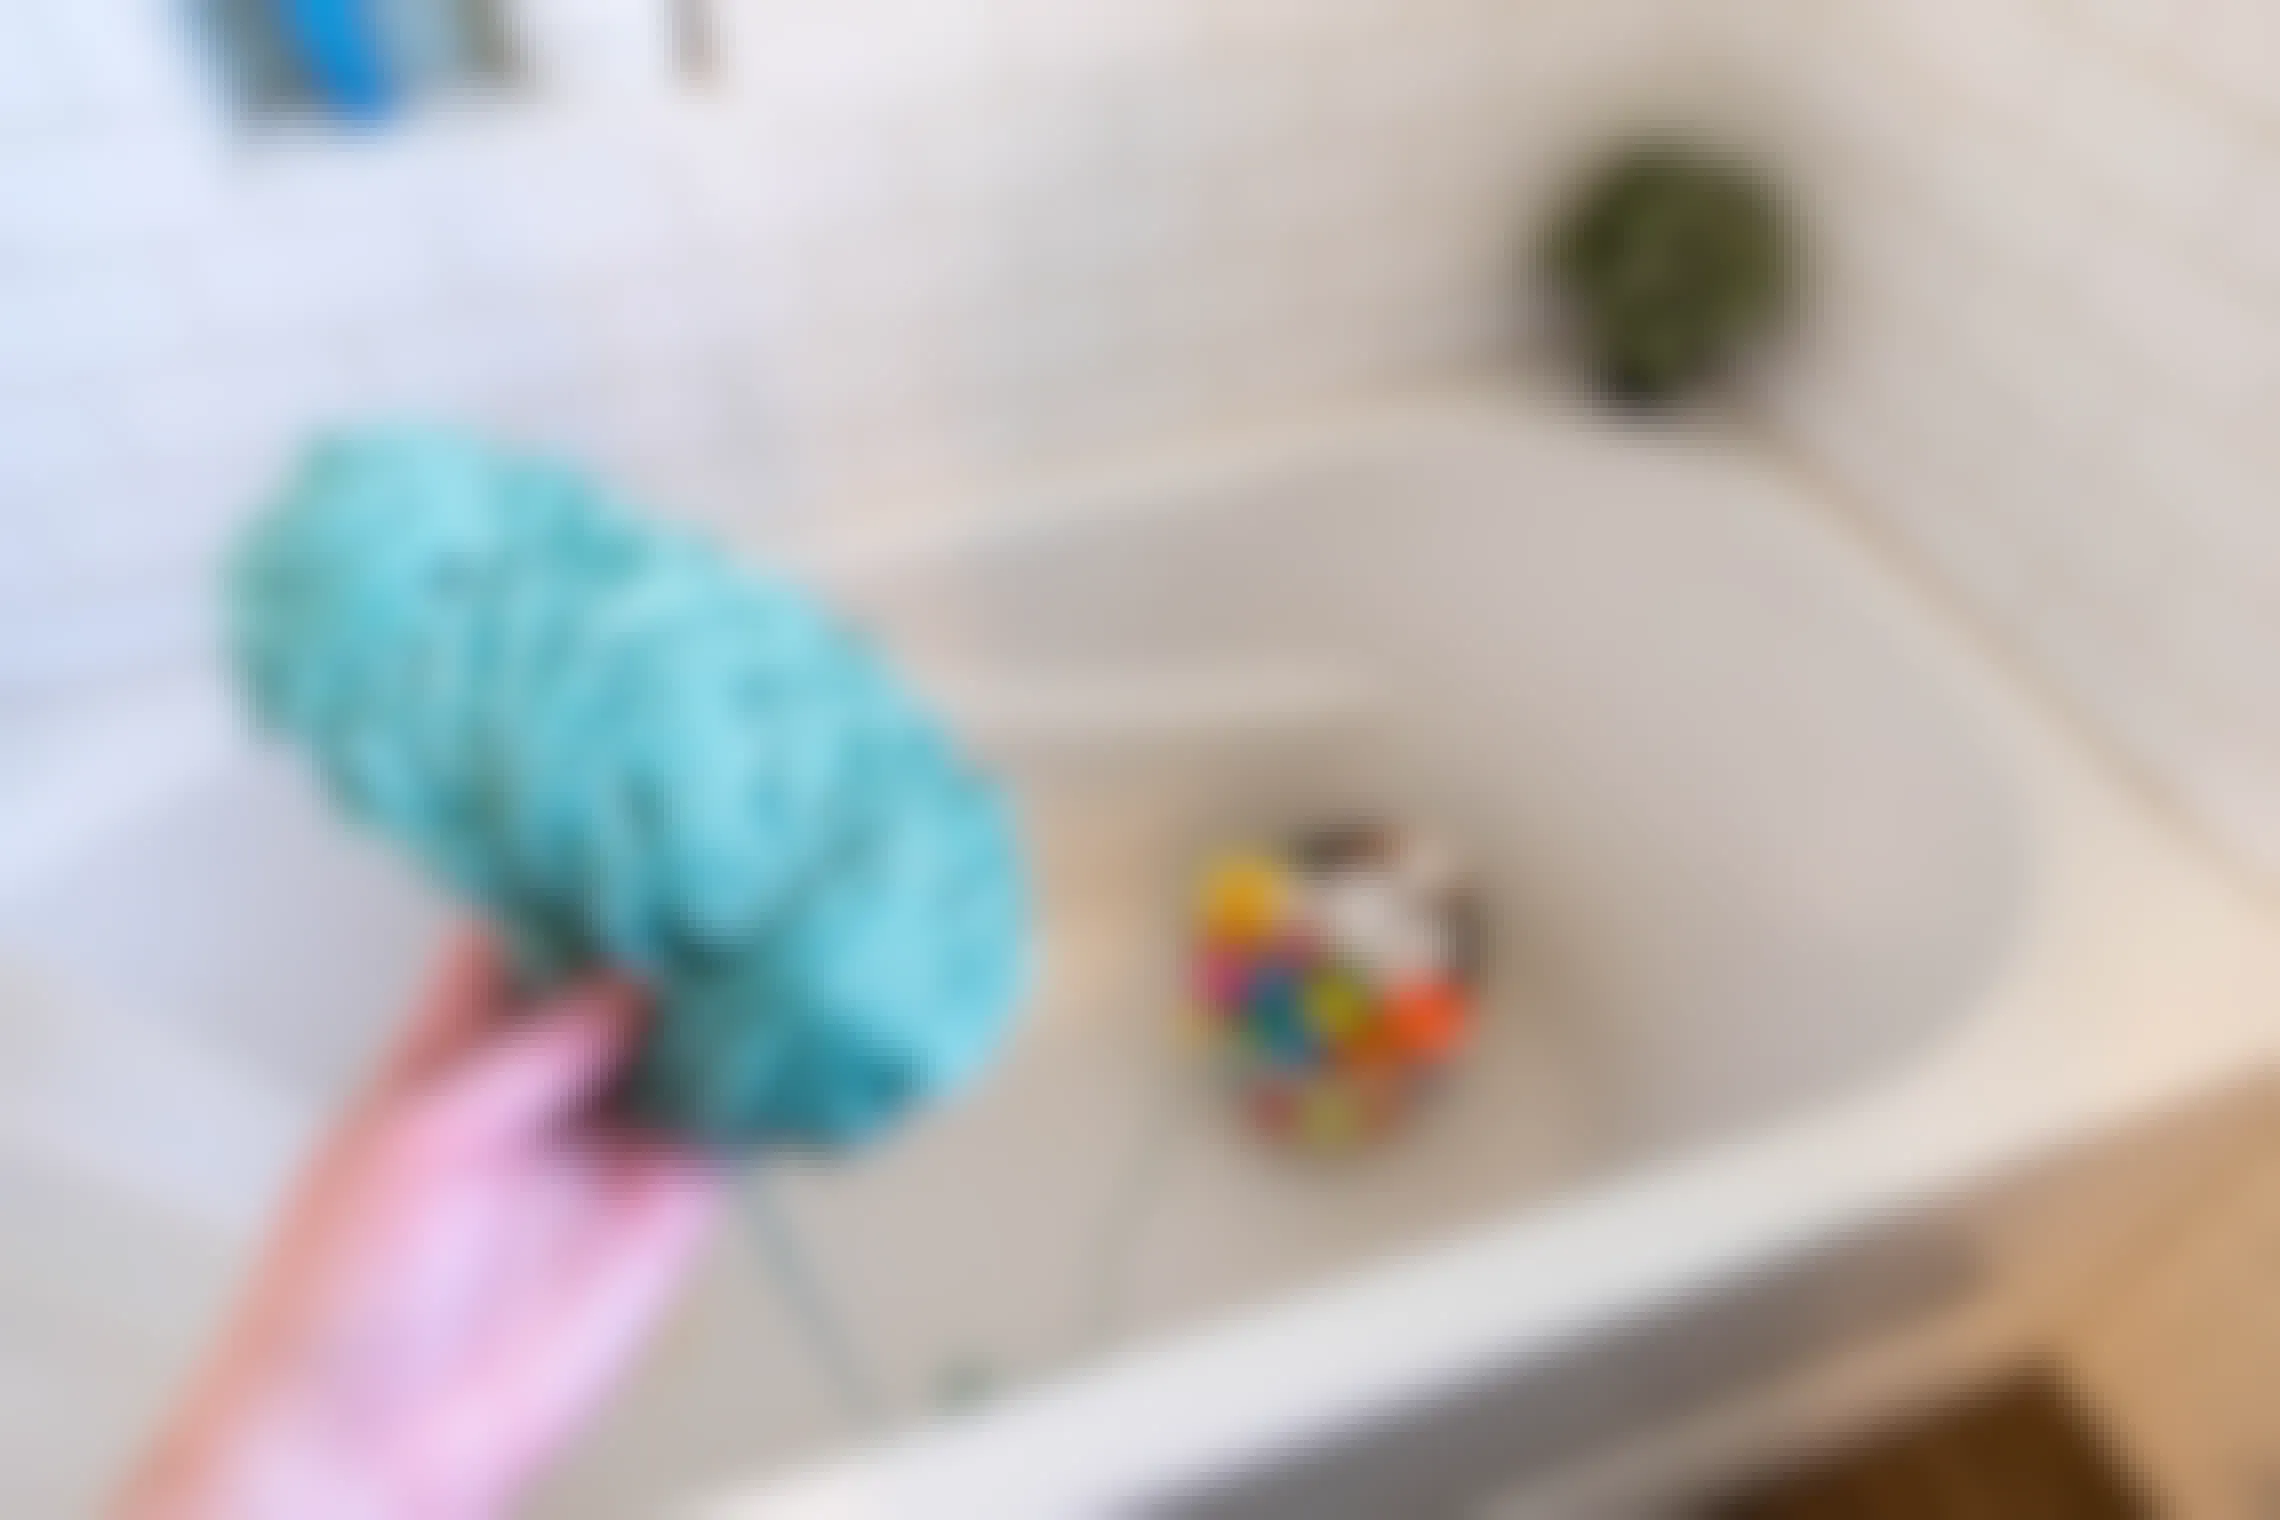 An Easter basket hidden in a bathtub with a string of yarn attached to it and the ball of yarn held in someones hand.